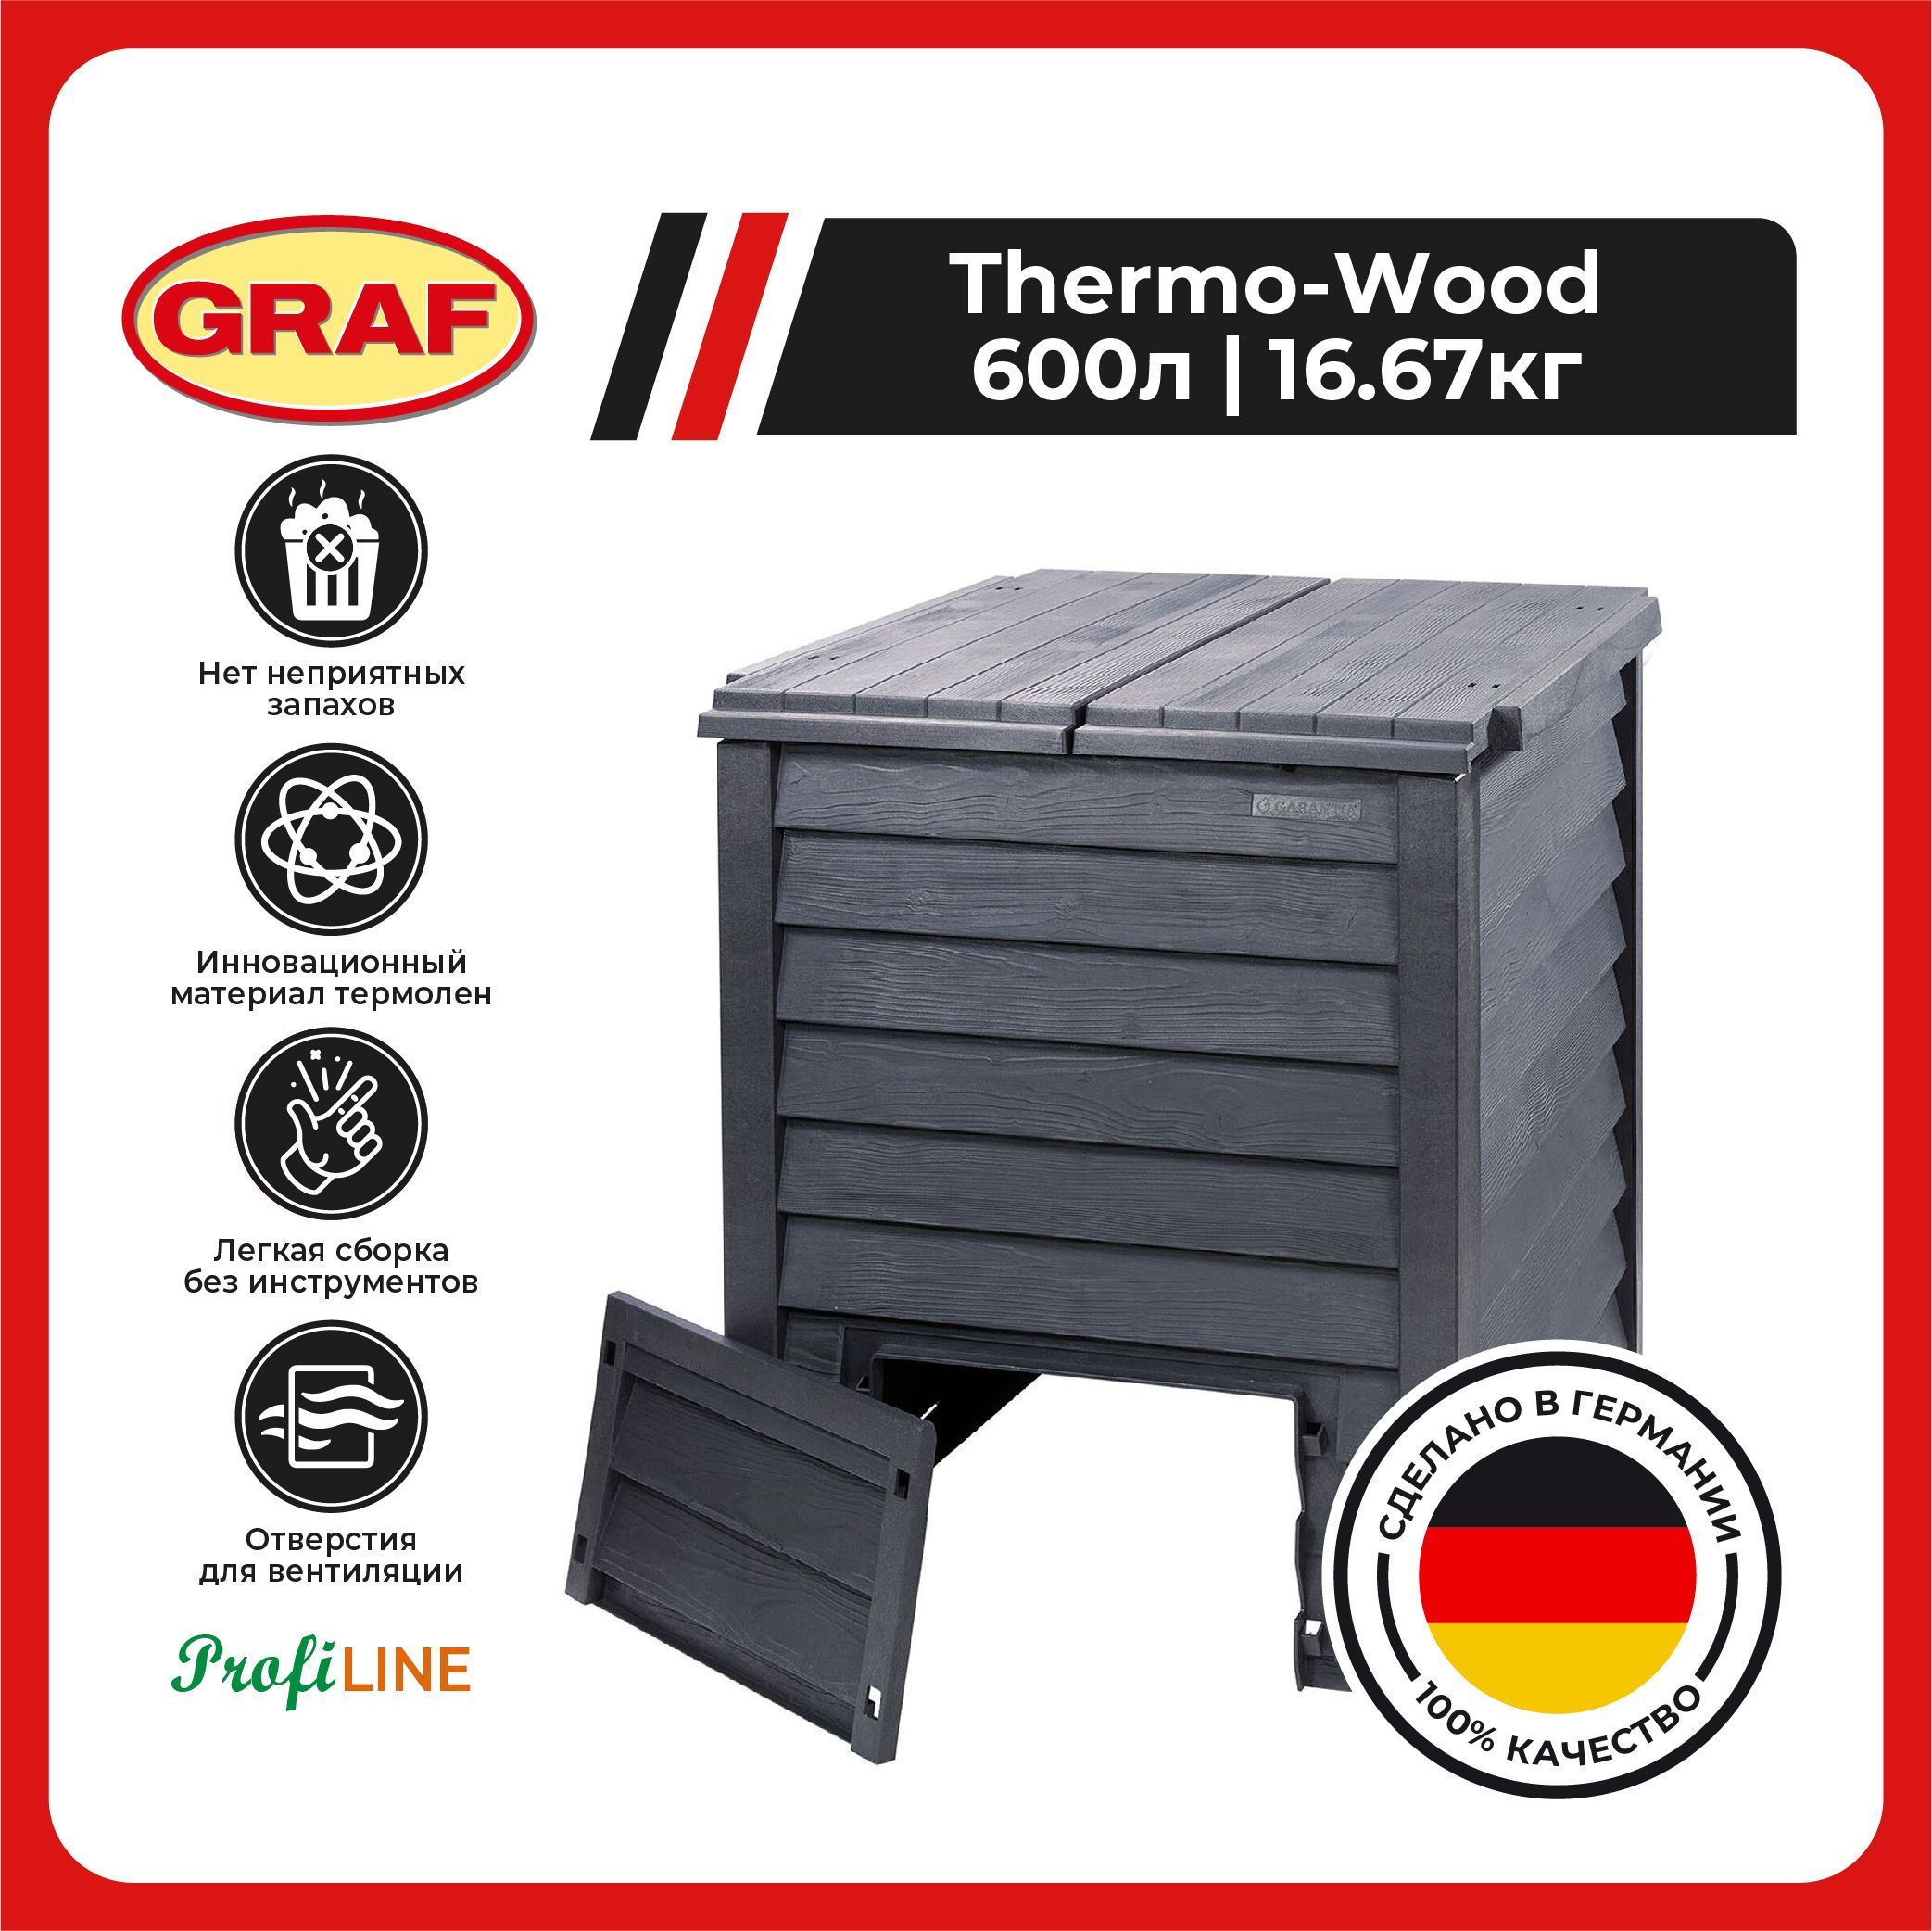 Composteur Thermo-Wood